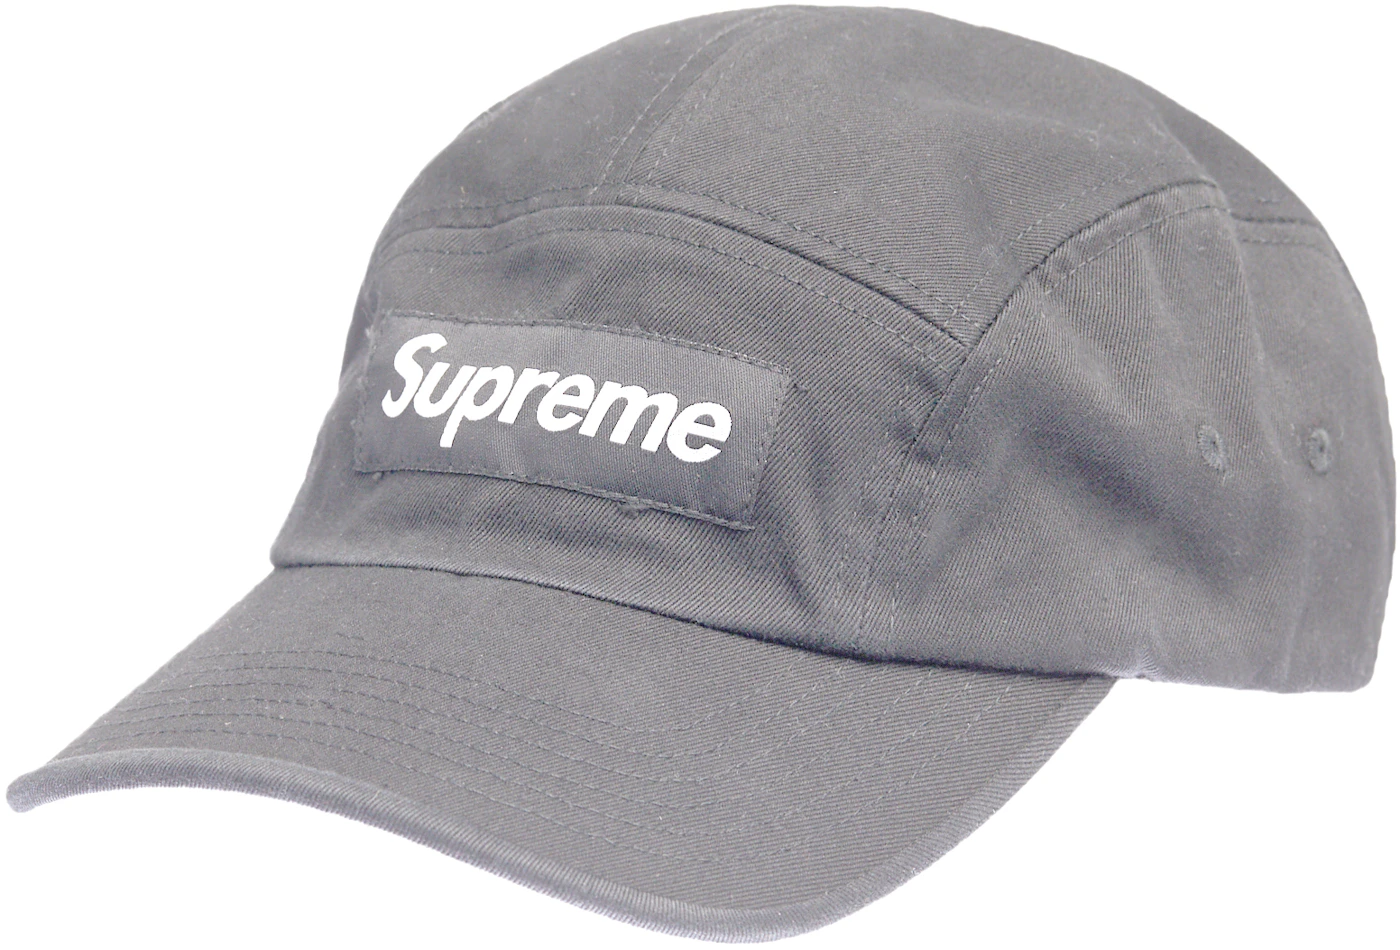 Supreme side zip twill camp cap review 